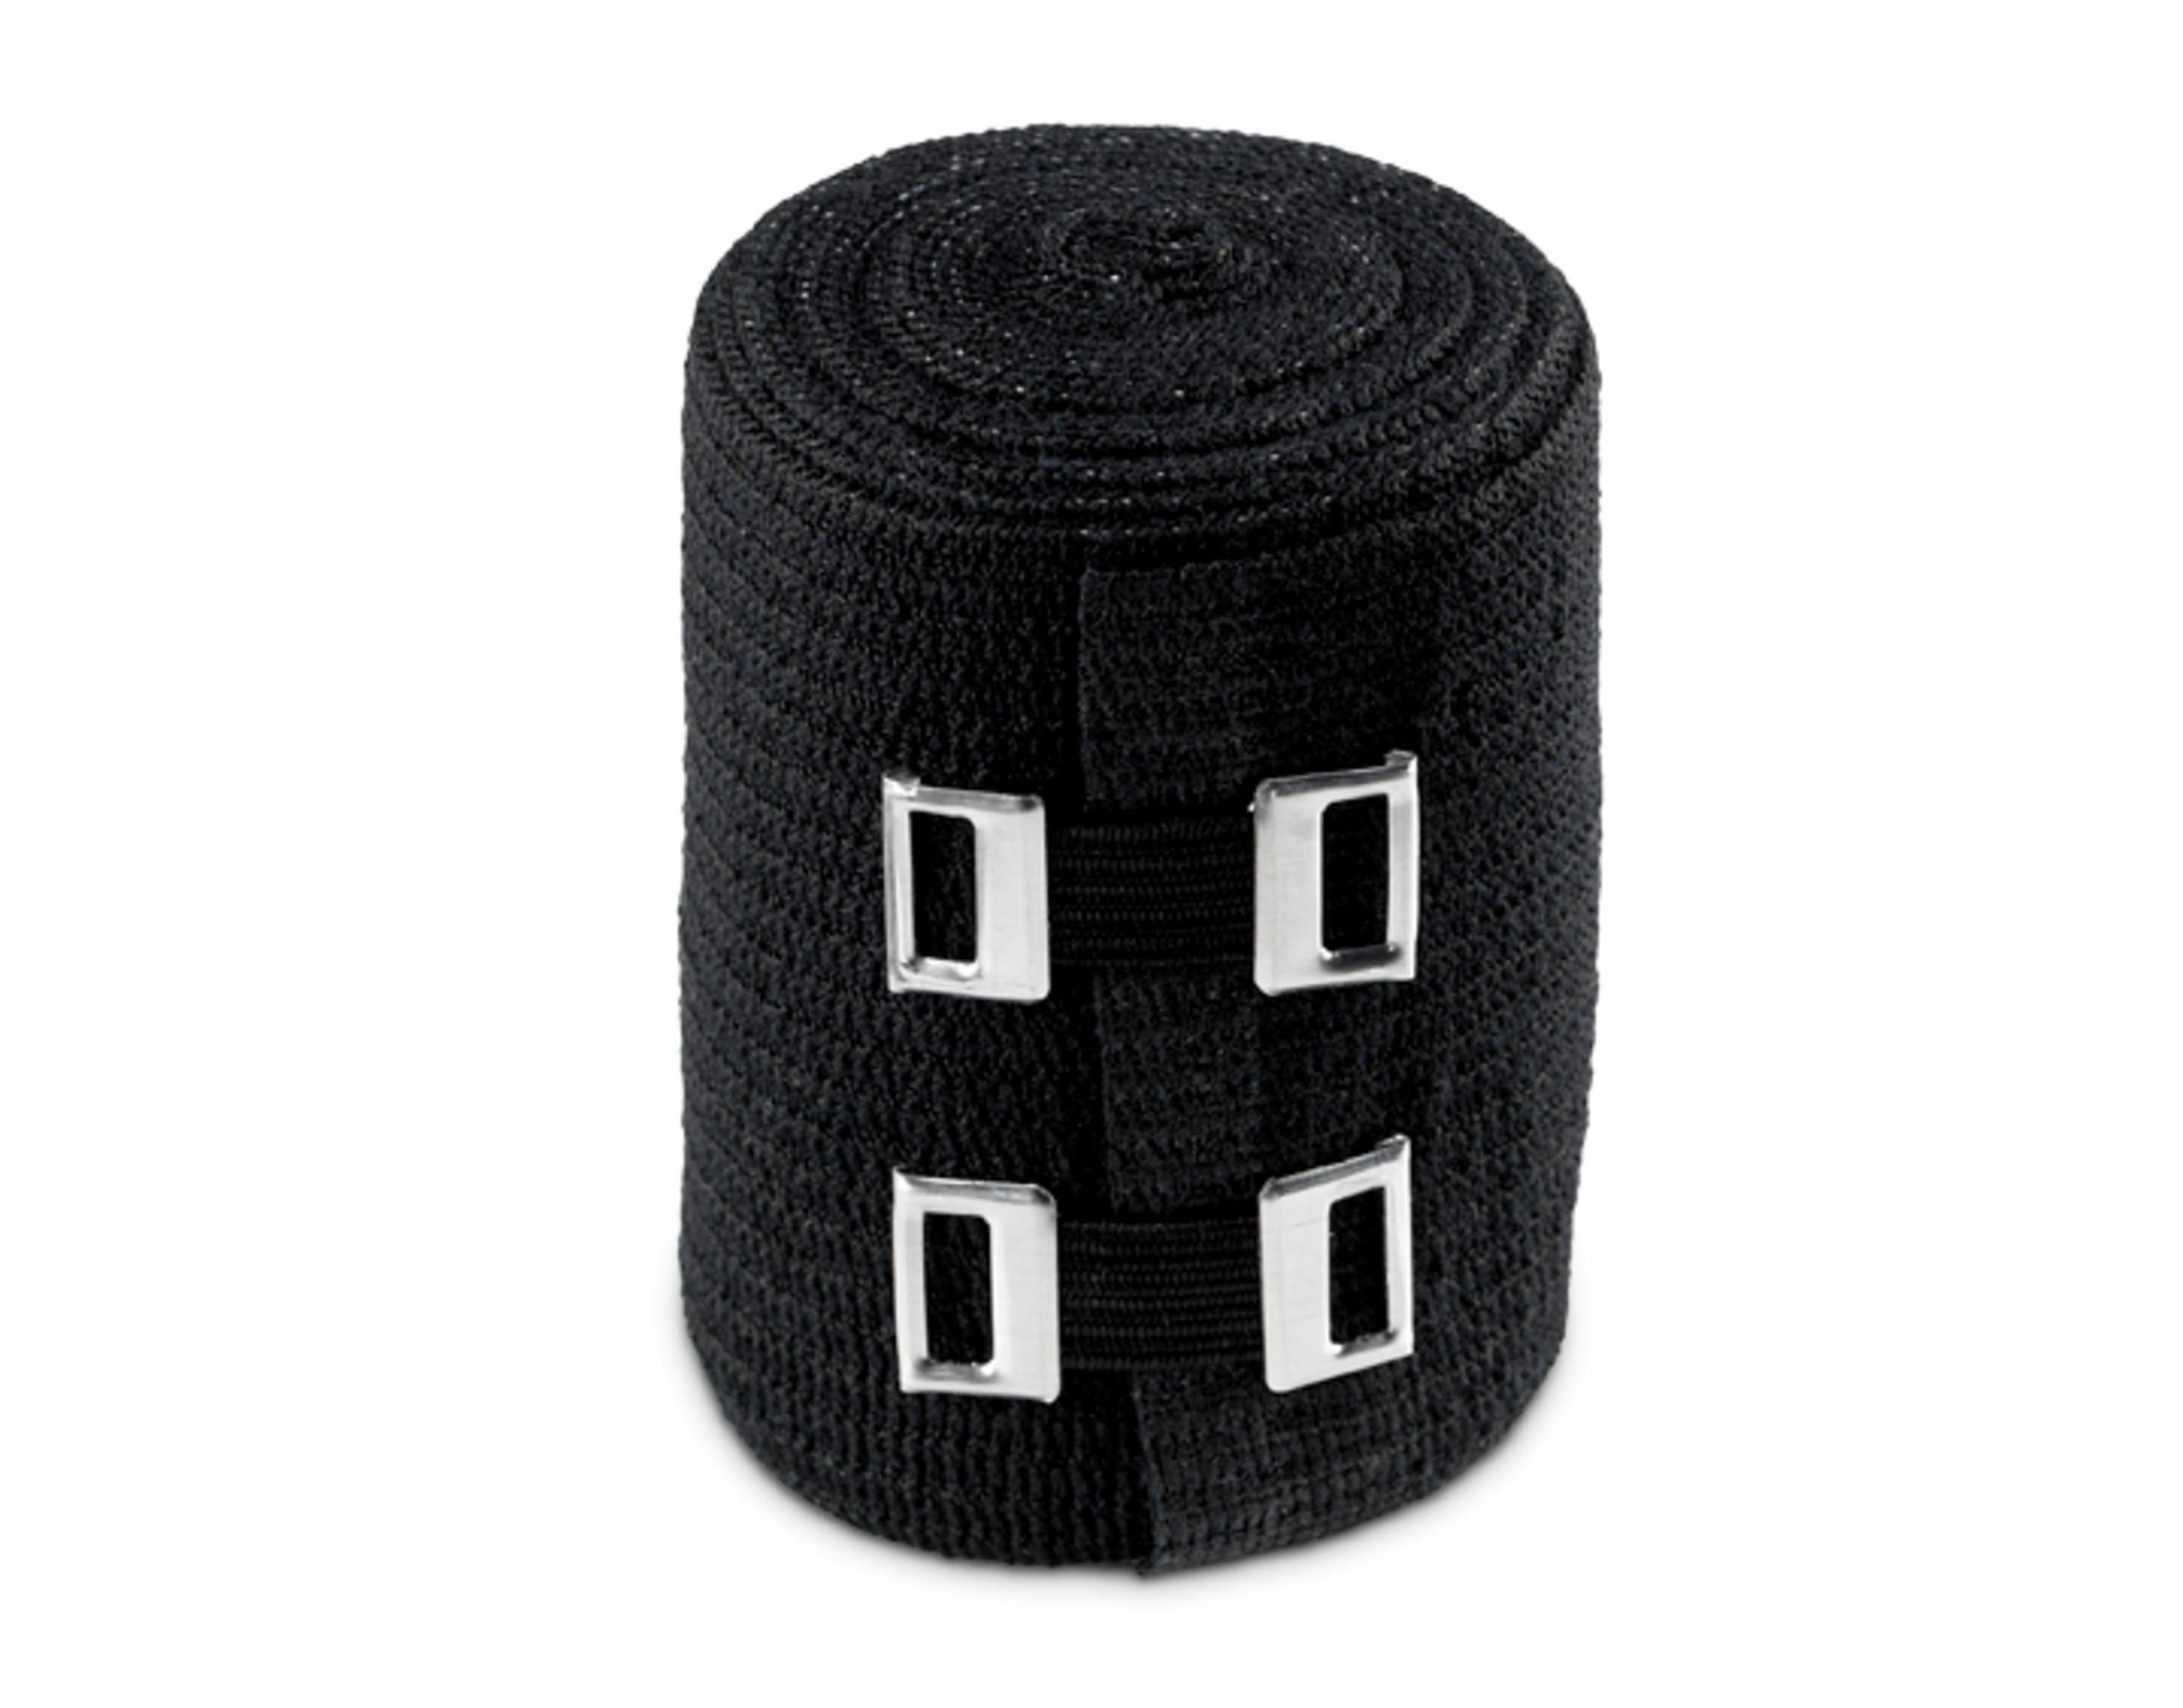 Buy Wrap And Bandage Holder Black in our shop online